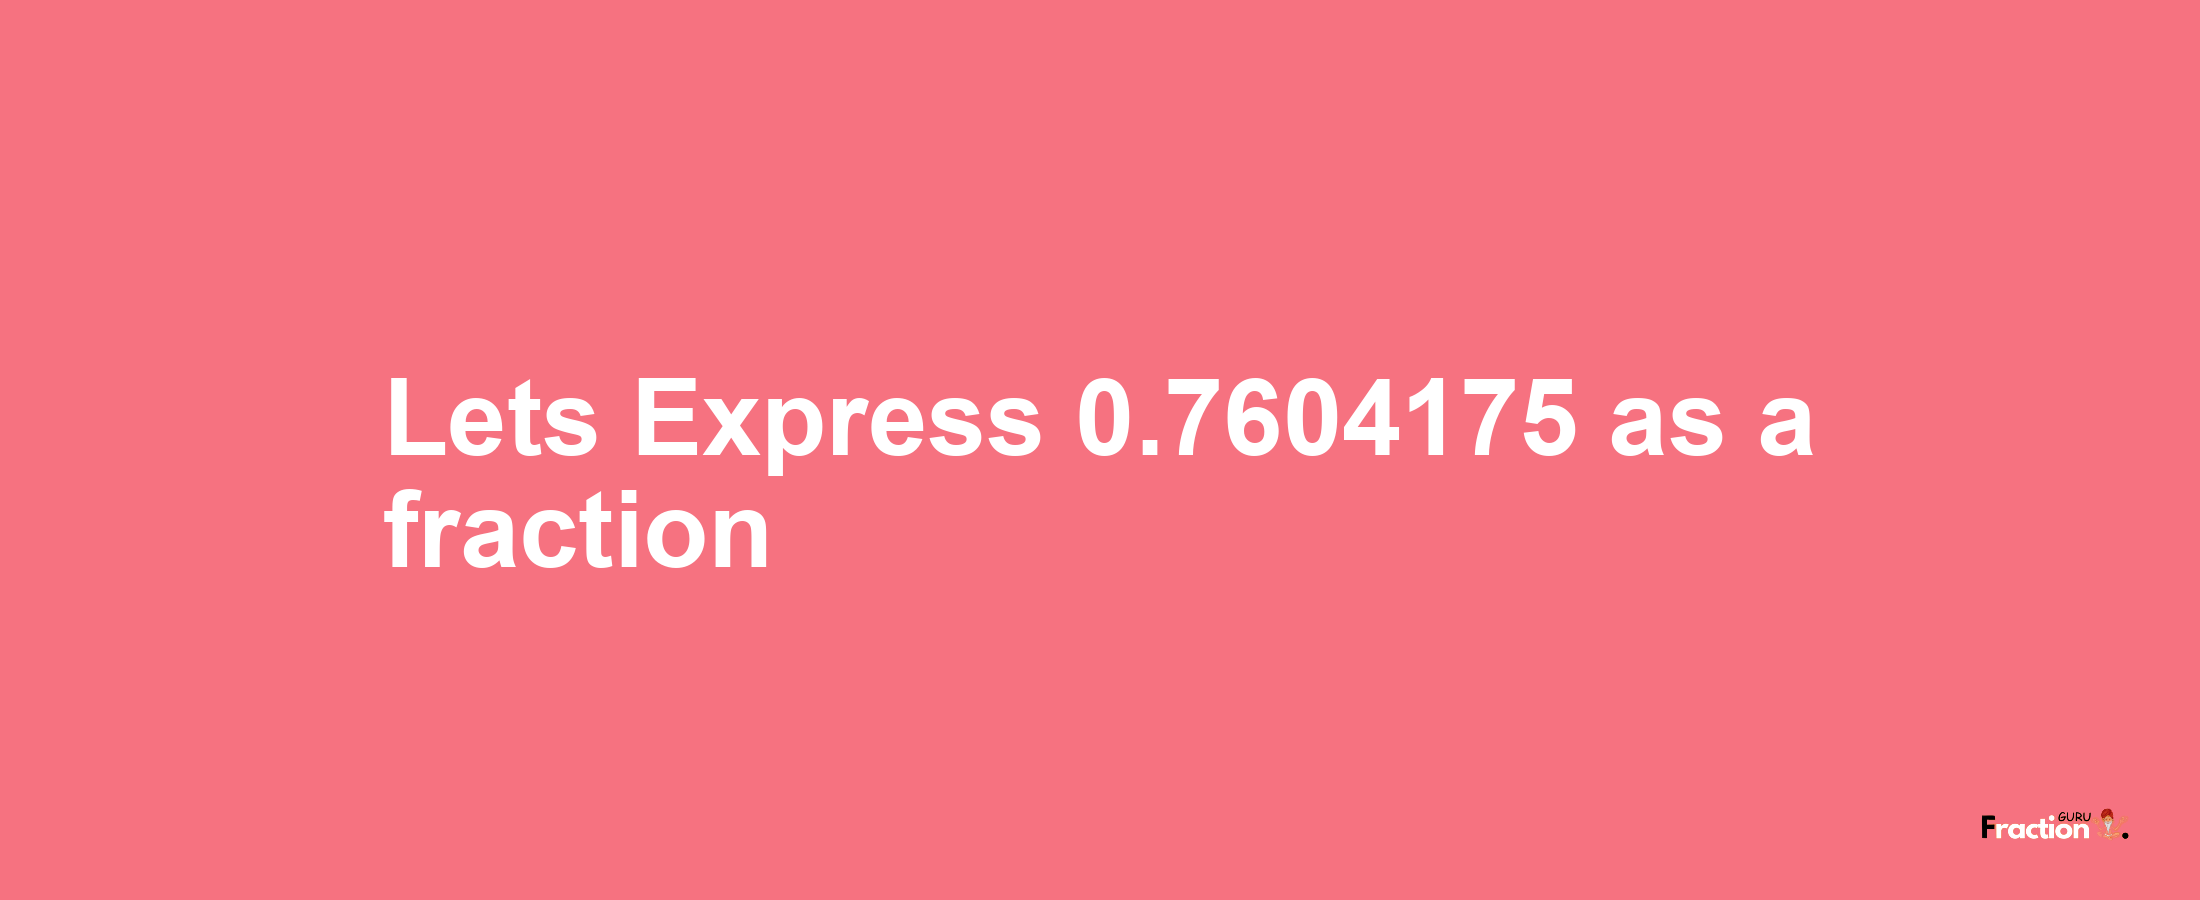 Lets Express 0.7604175 as afraction